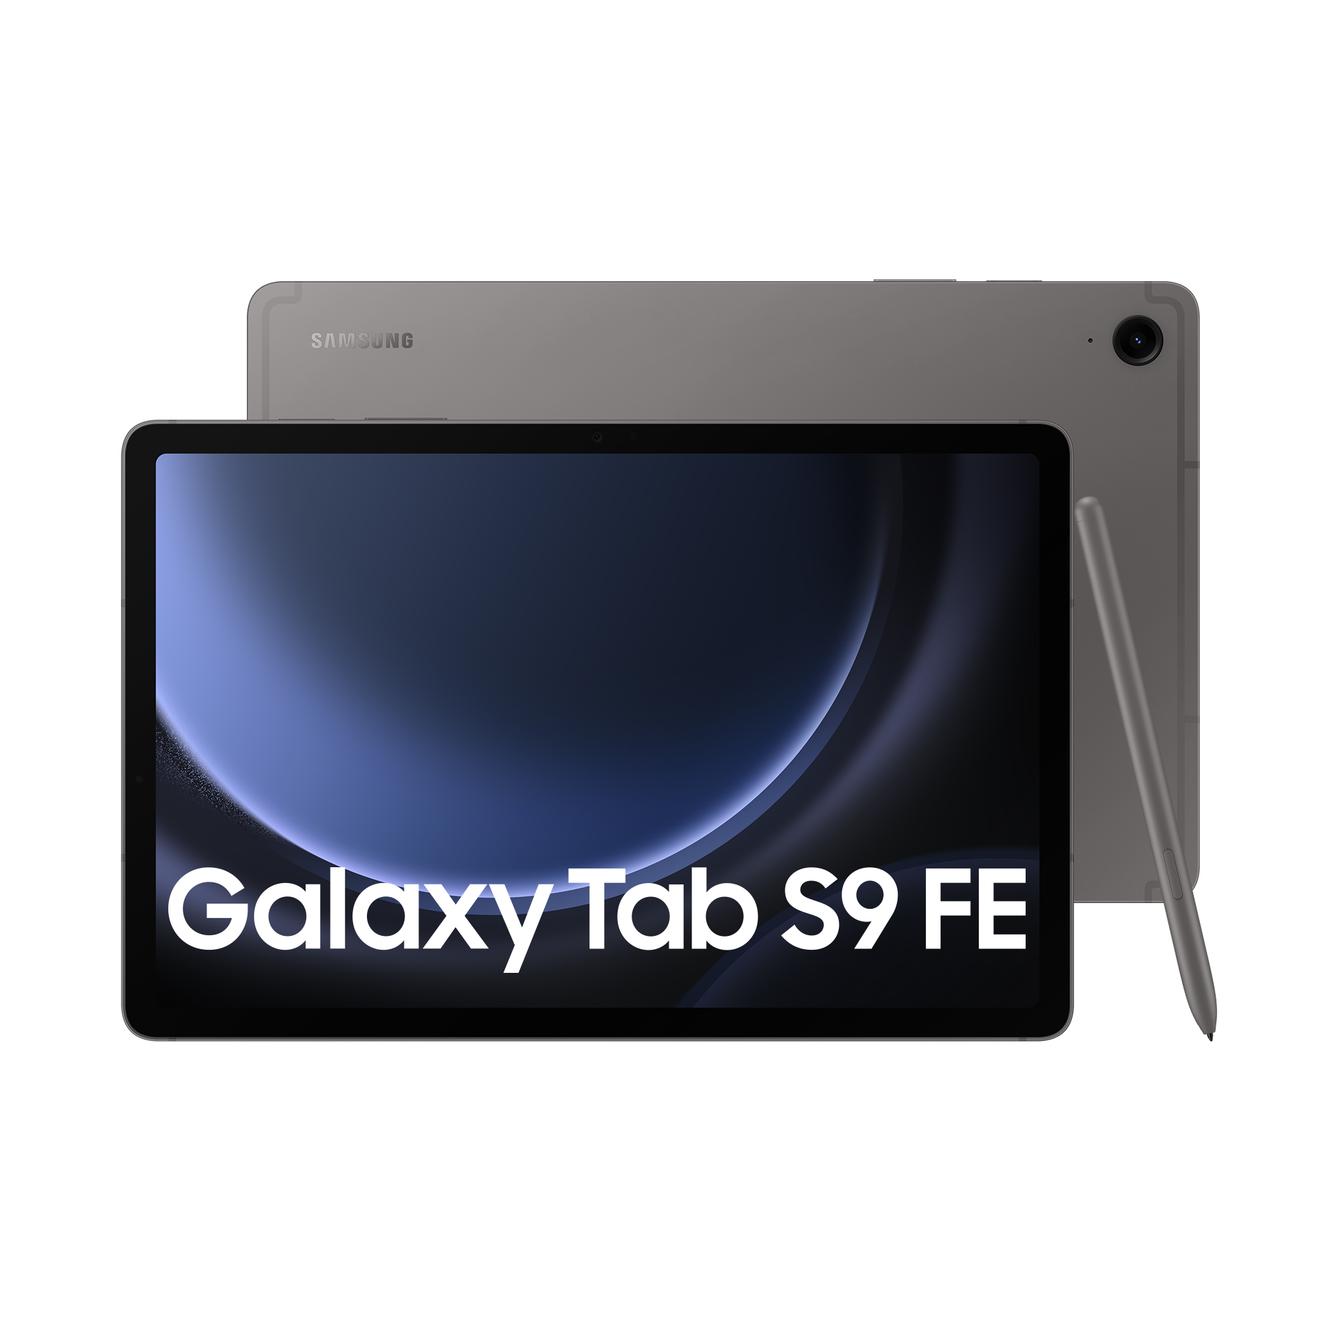 Offerta per Samsung - Galaxy Tab S9 Fe Tablet Android 10.9 Pollici Tft Lcd Pls 5g Ram 6 Gb 128 Gb Tablet Android 13 Gray a 419€ in Trony